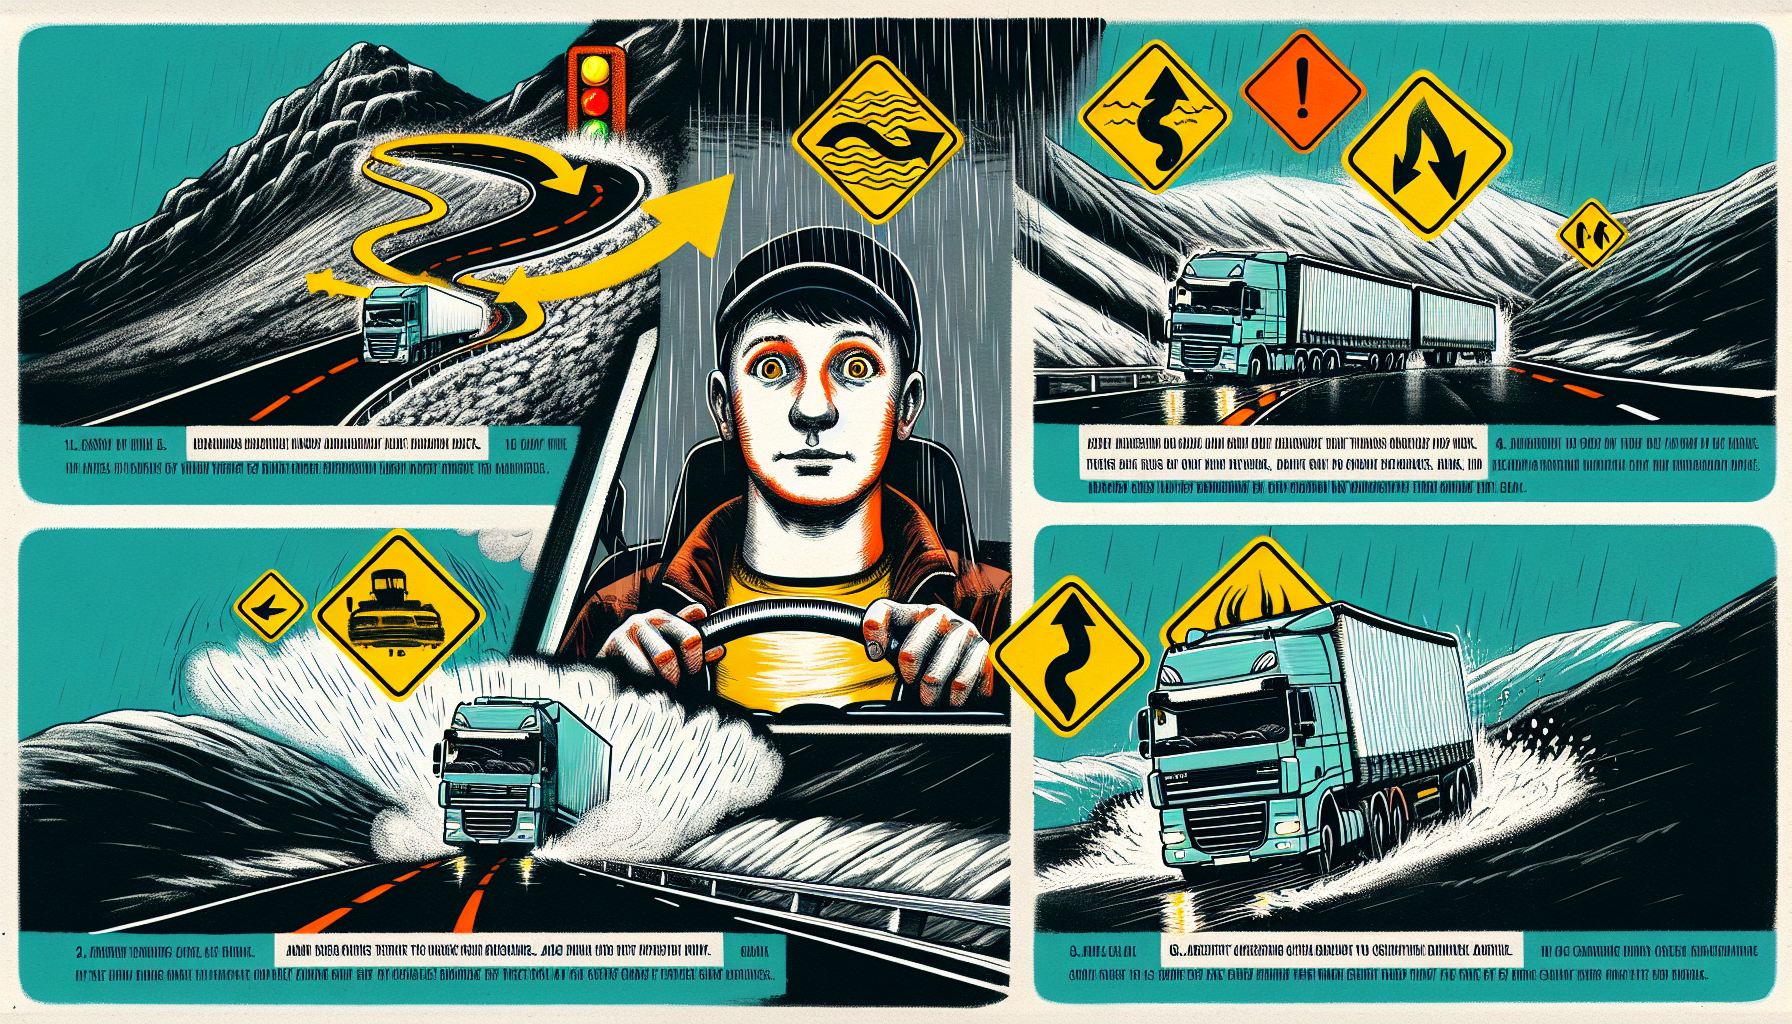 Illustration of safety tips for truckers on dangerous routes